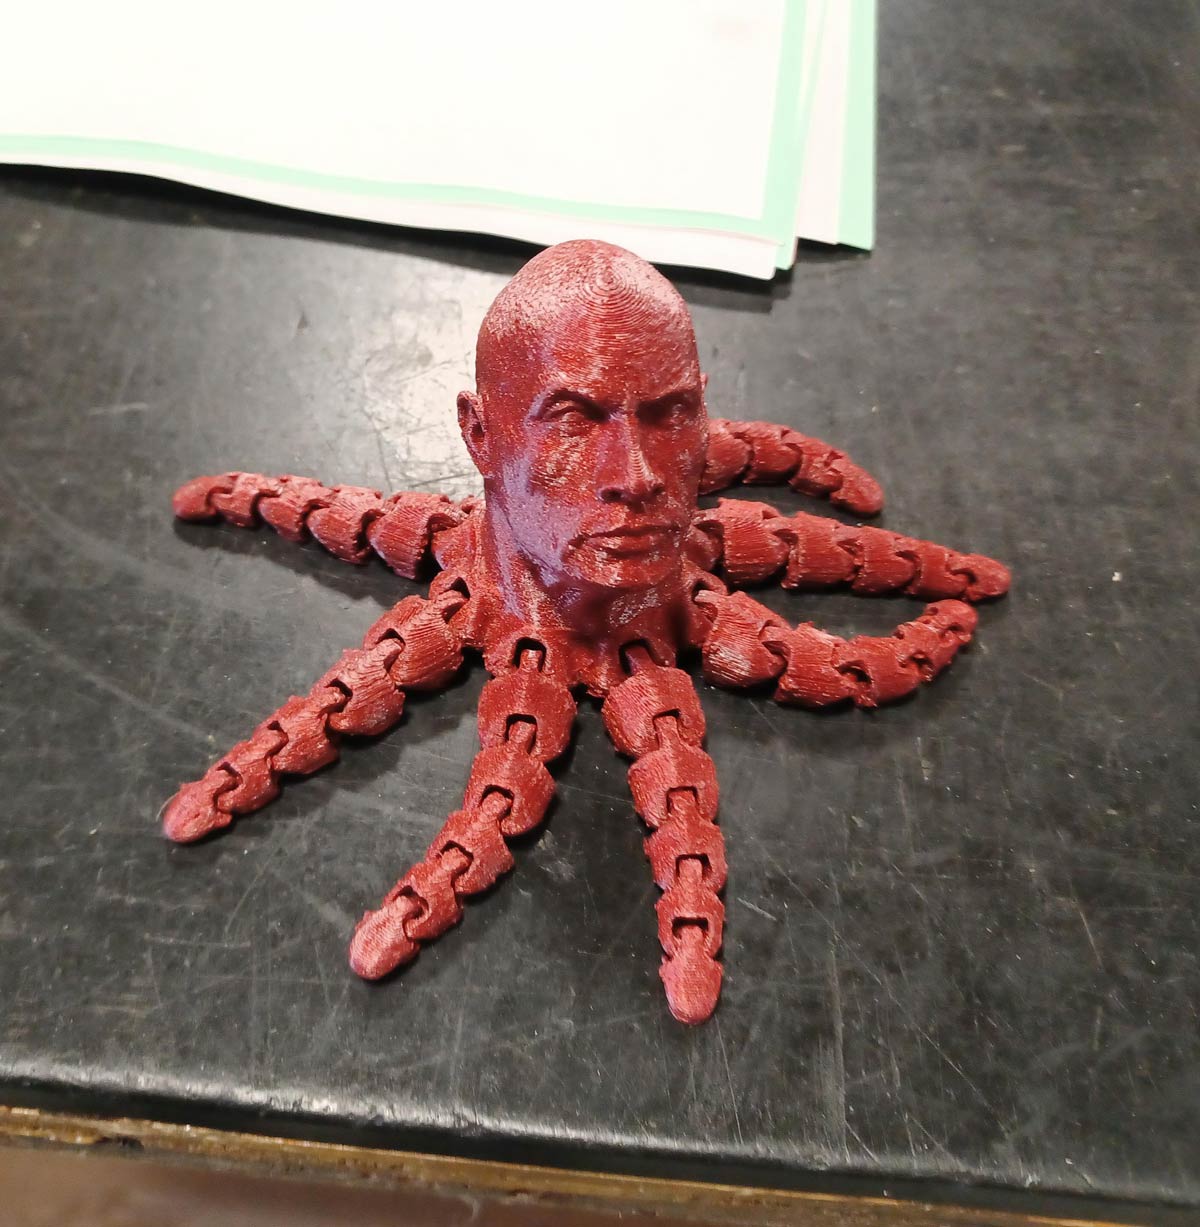 A buddy at work 3D printed The Rocktopus